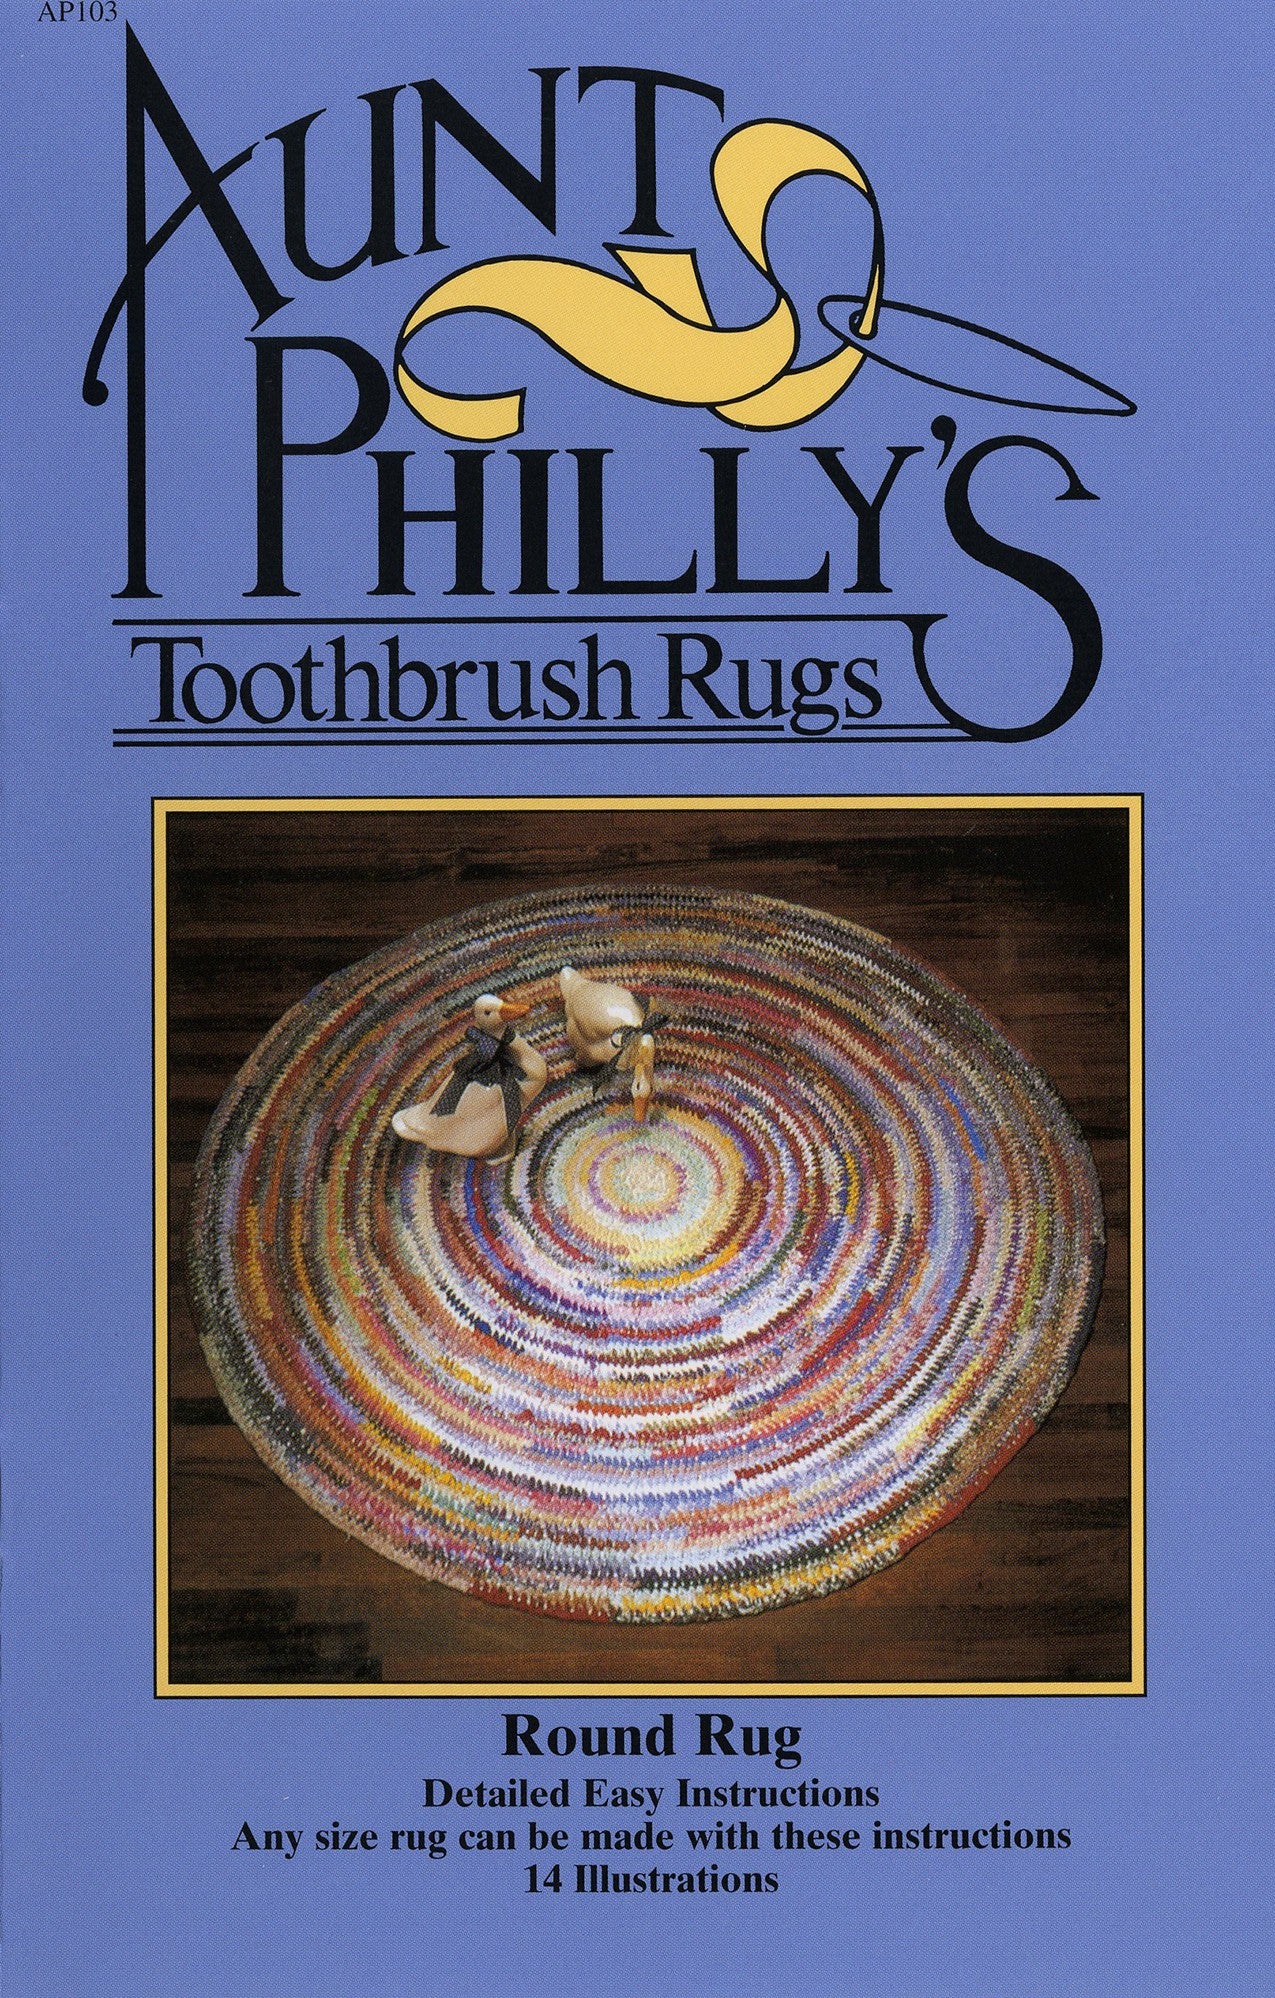 Aunt Philly's Toothbrush Rug Round Rugmaking Pattern and Instructions by Phyllis Haus